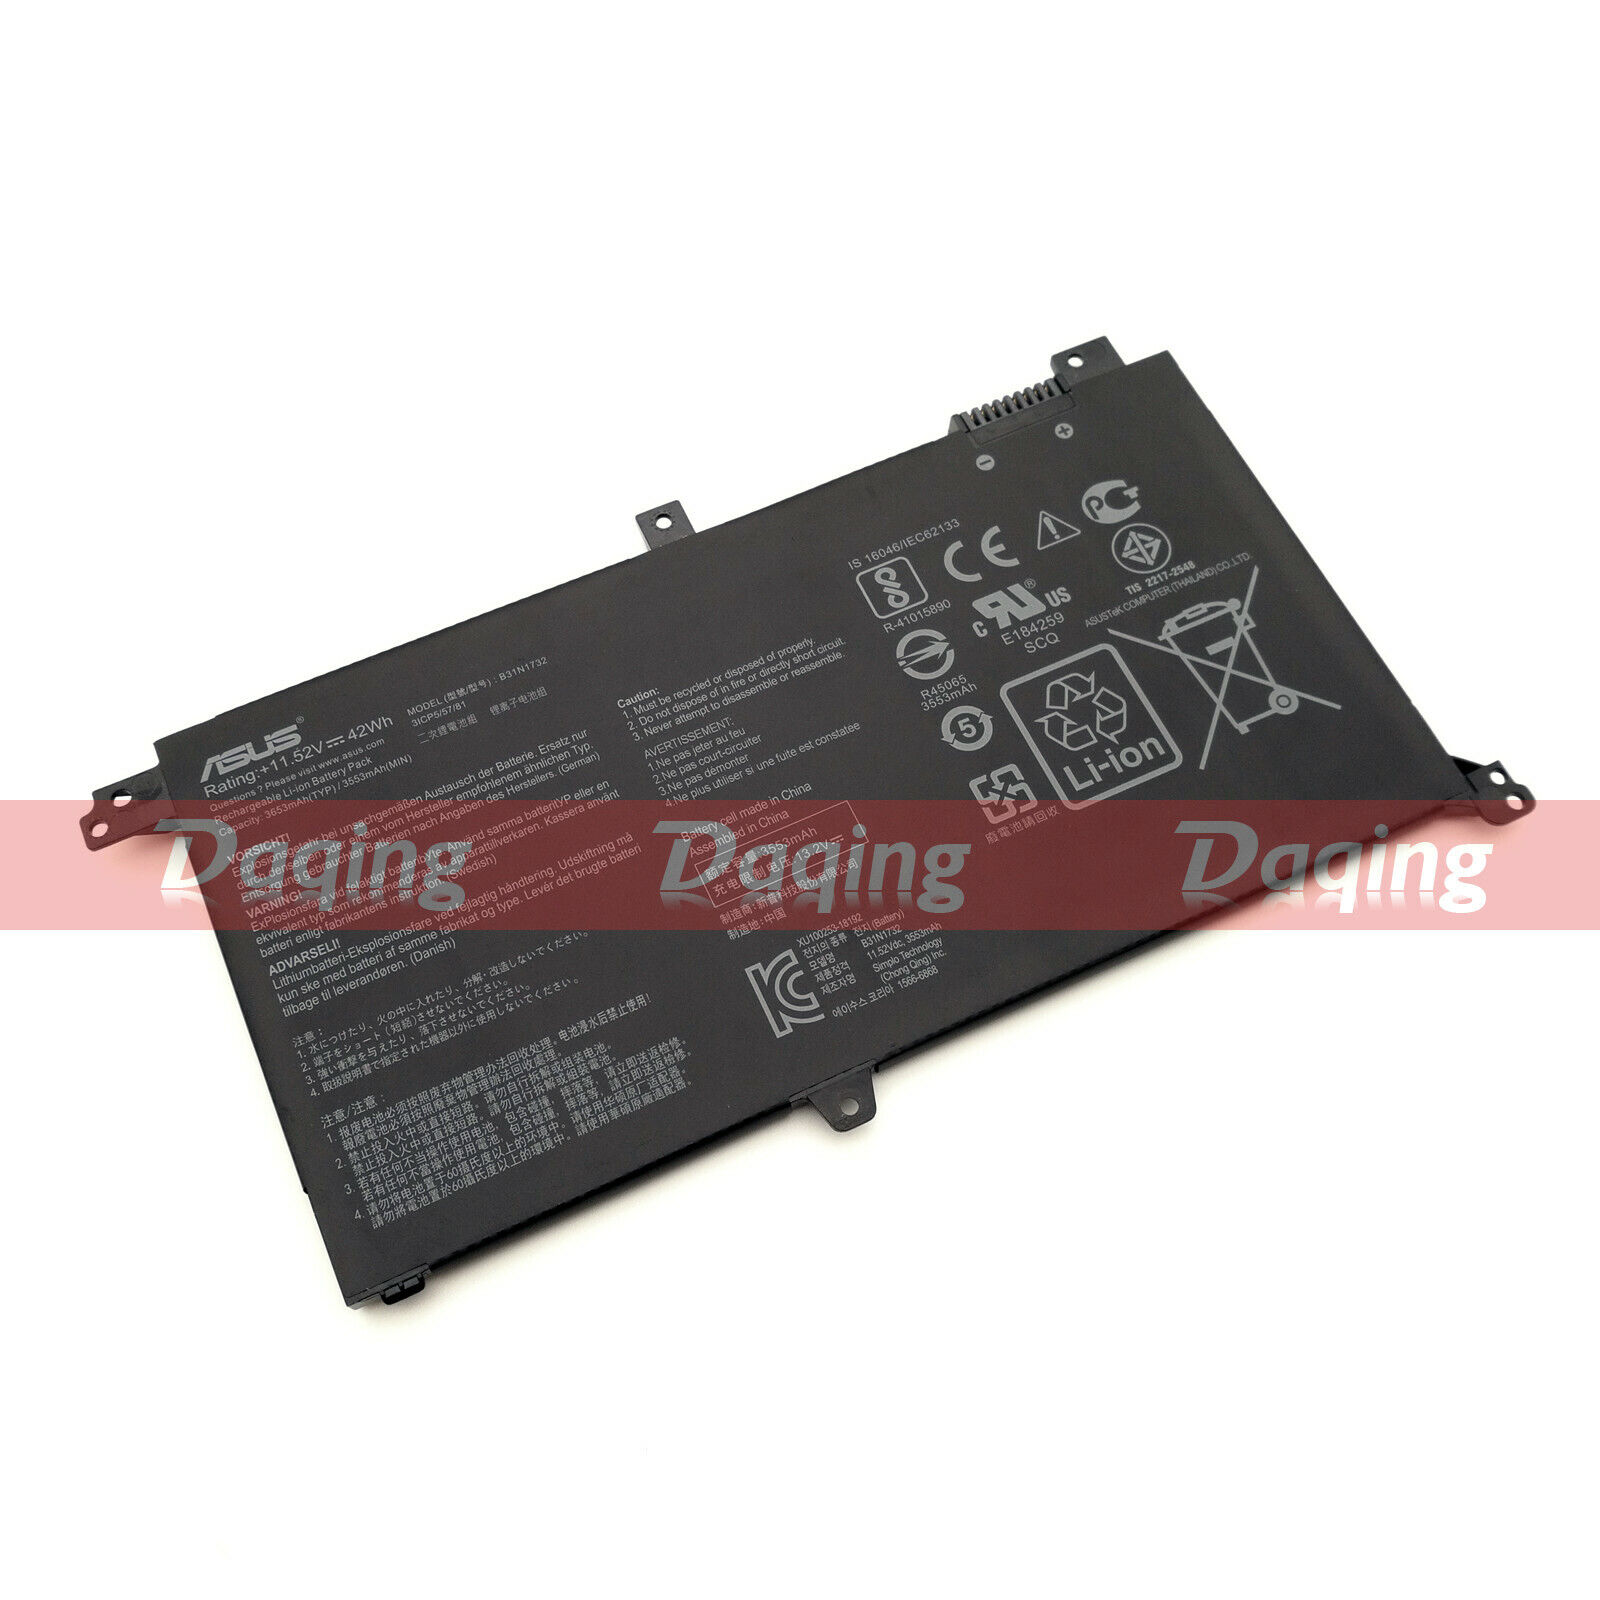 New Original B31N1732 Battery for Asus X430FN VX60G S4300F S4300FN X430UN X430UF